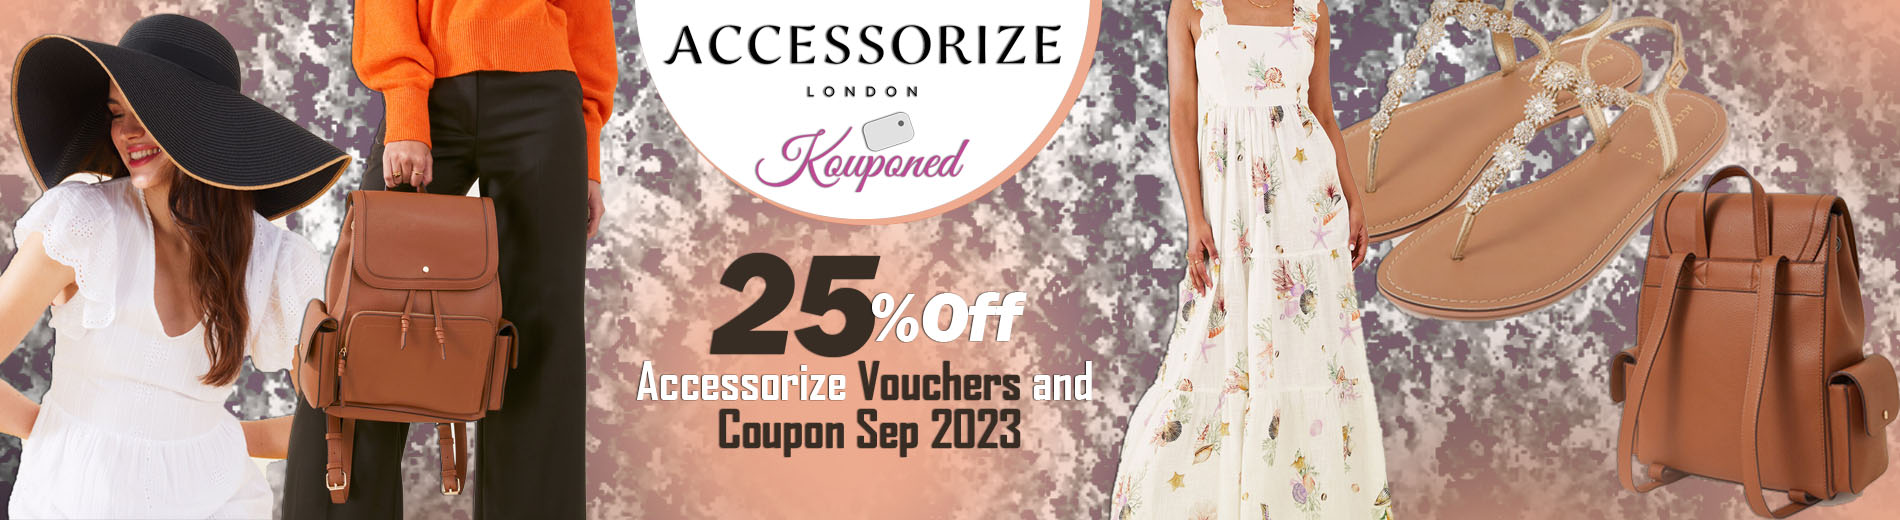 25% Off Accessorize vouchers and coupon13 ACTIVE) Sep 2023